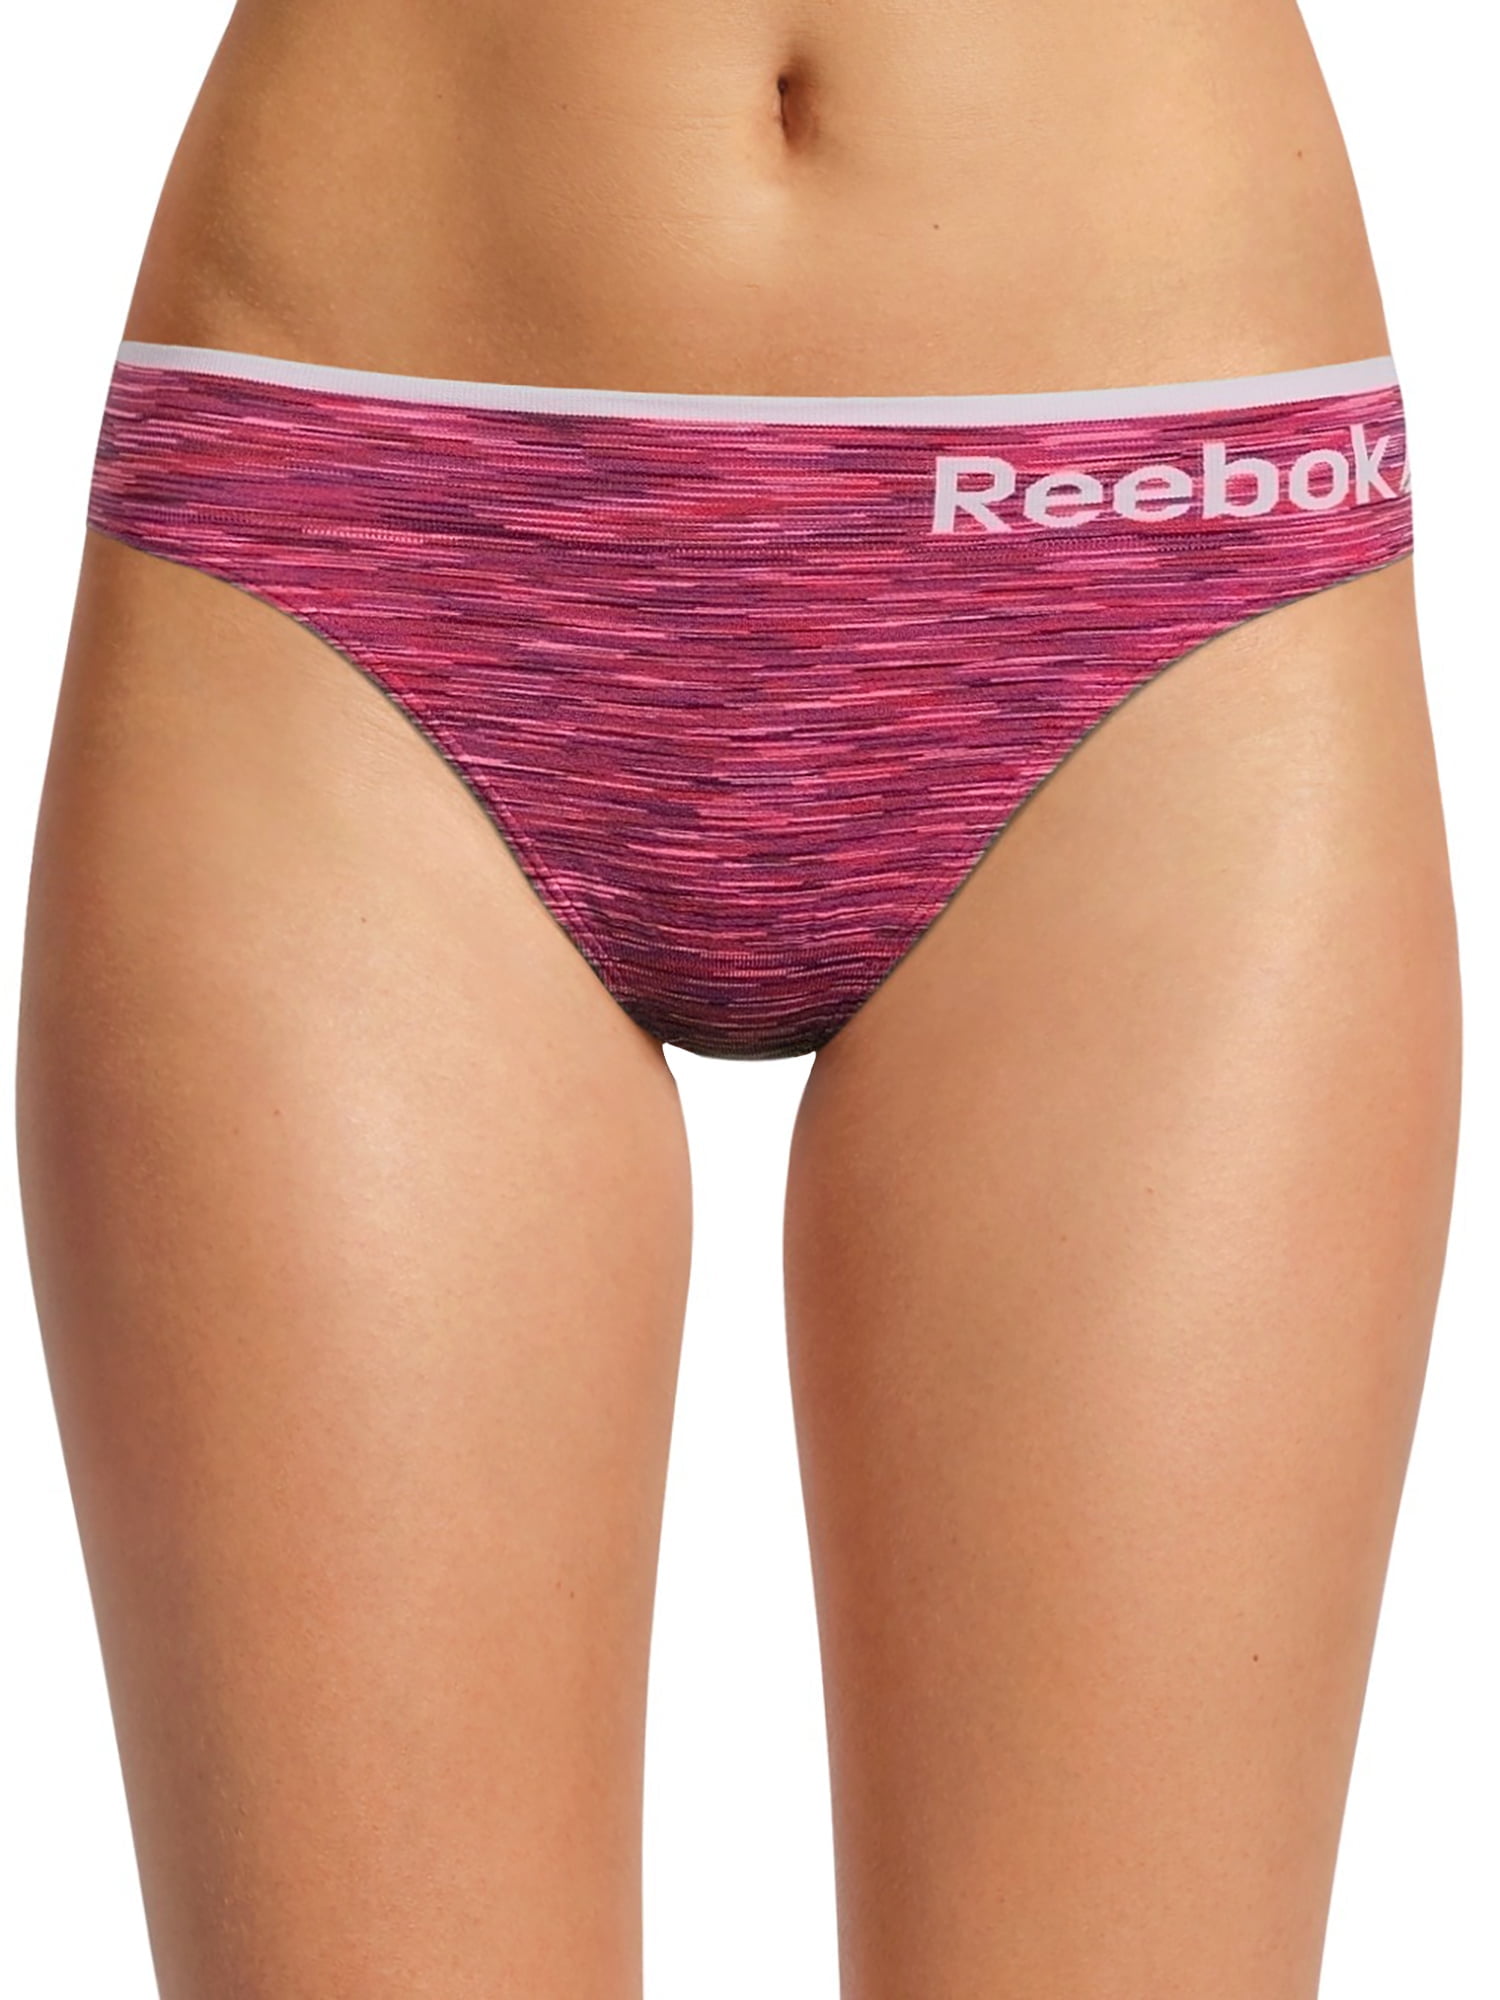  Reebok Women's Underwear - Stretch Performance Thong (6 Pack),  Size Small, Blue/Lotus/Black : Clothing, Shoes & Jewelry